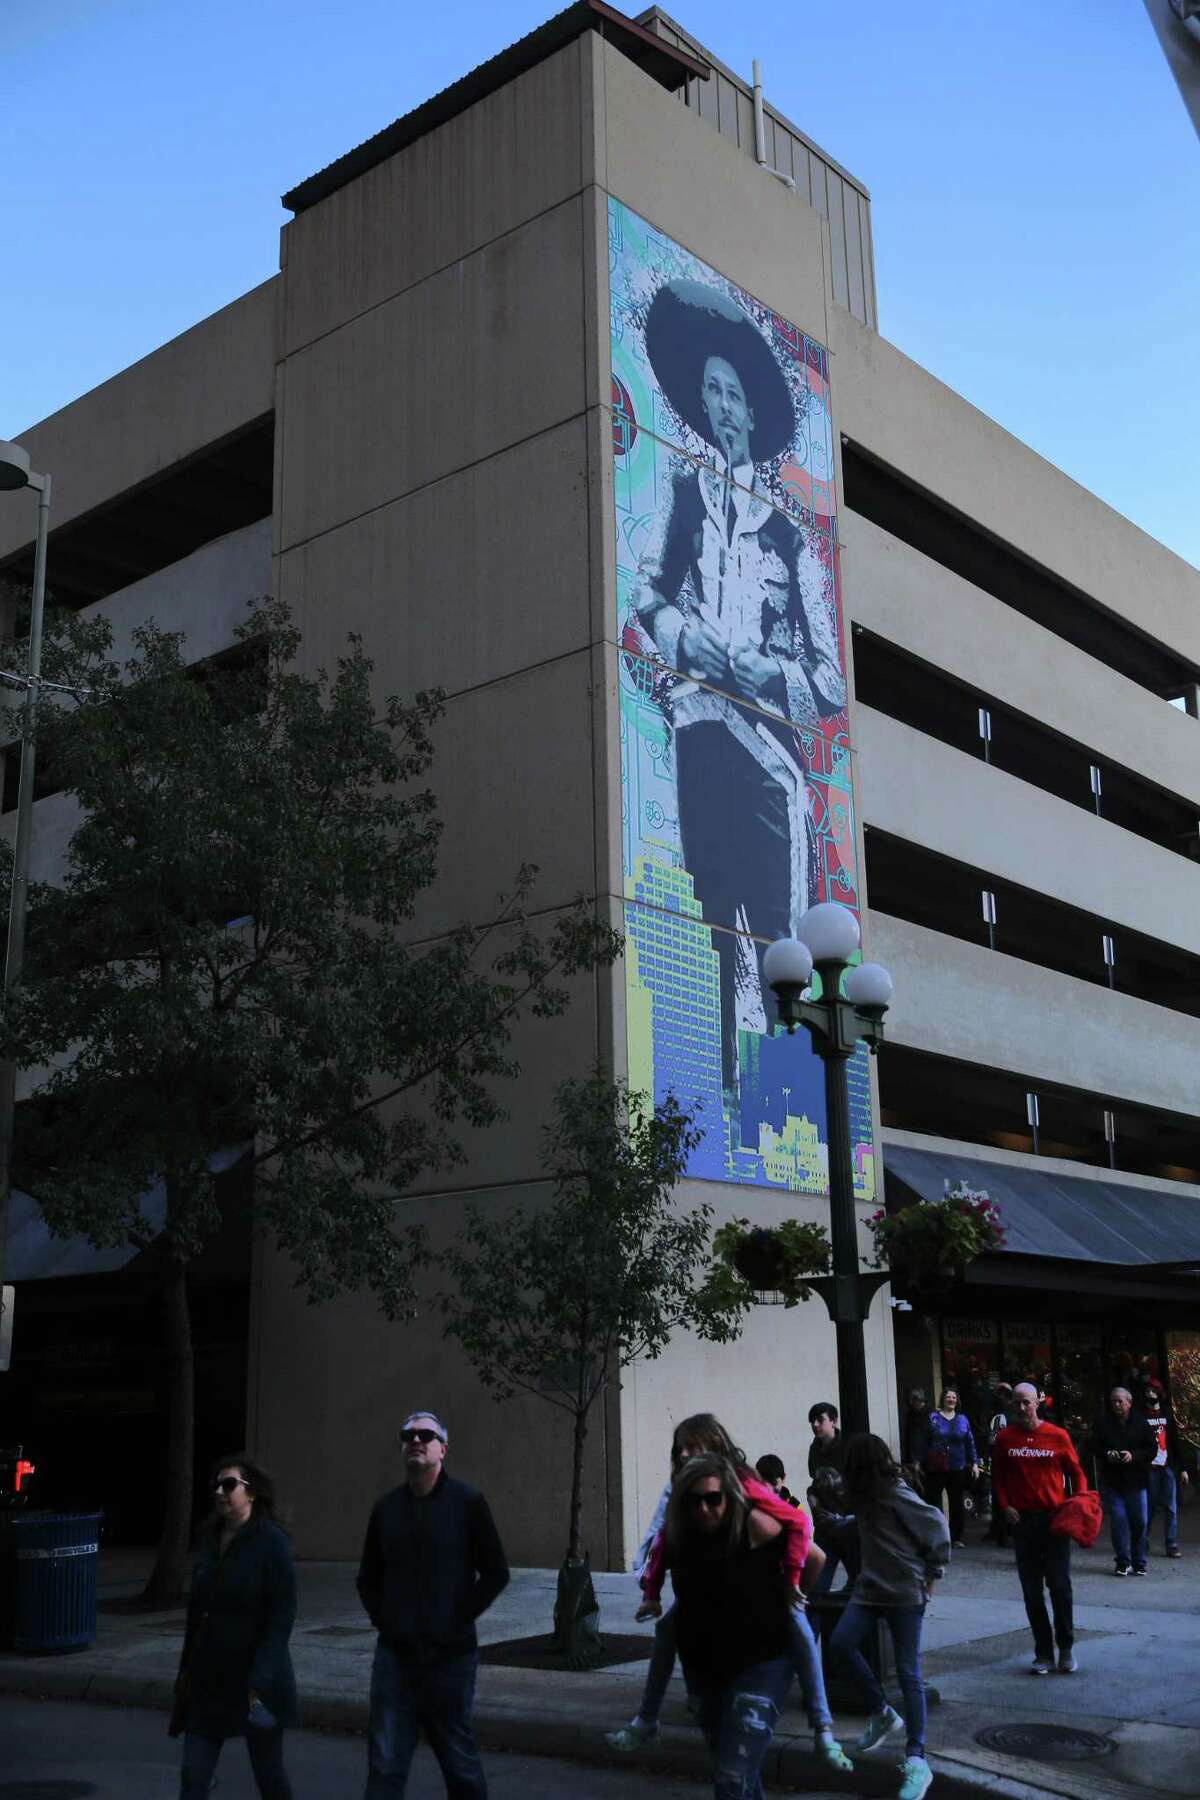 Artist Luis Valdera’s mural “Sky, Earth and Mariachi Lecho Over San Antonio” depicts a larger-than-life mariachi looming over the city’s skyline.